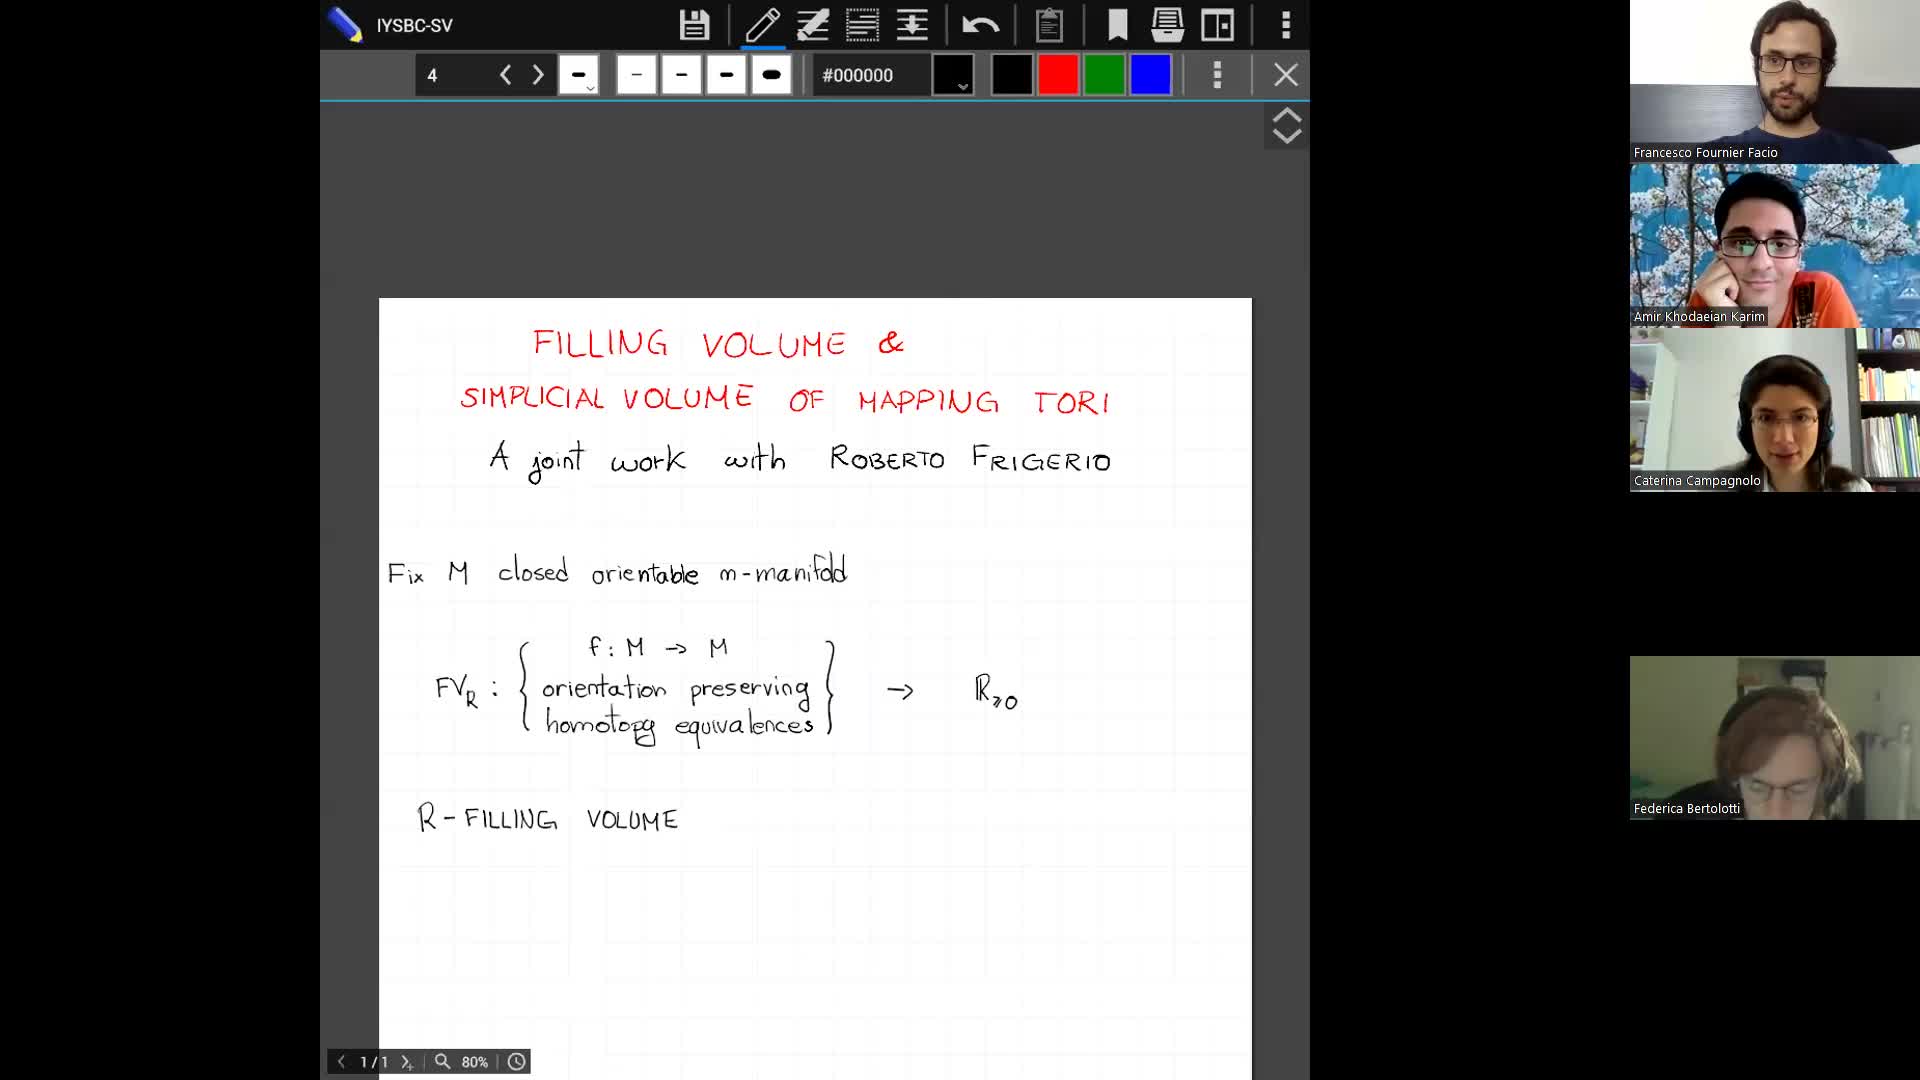 Filling volume and simplicial volume of mapping tori